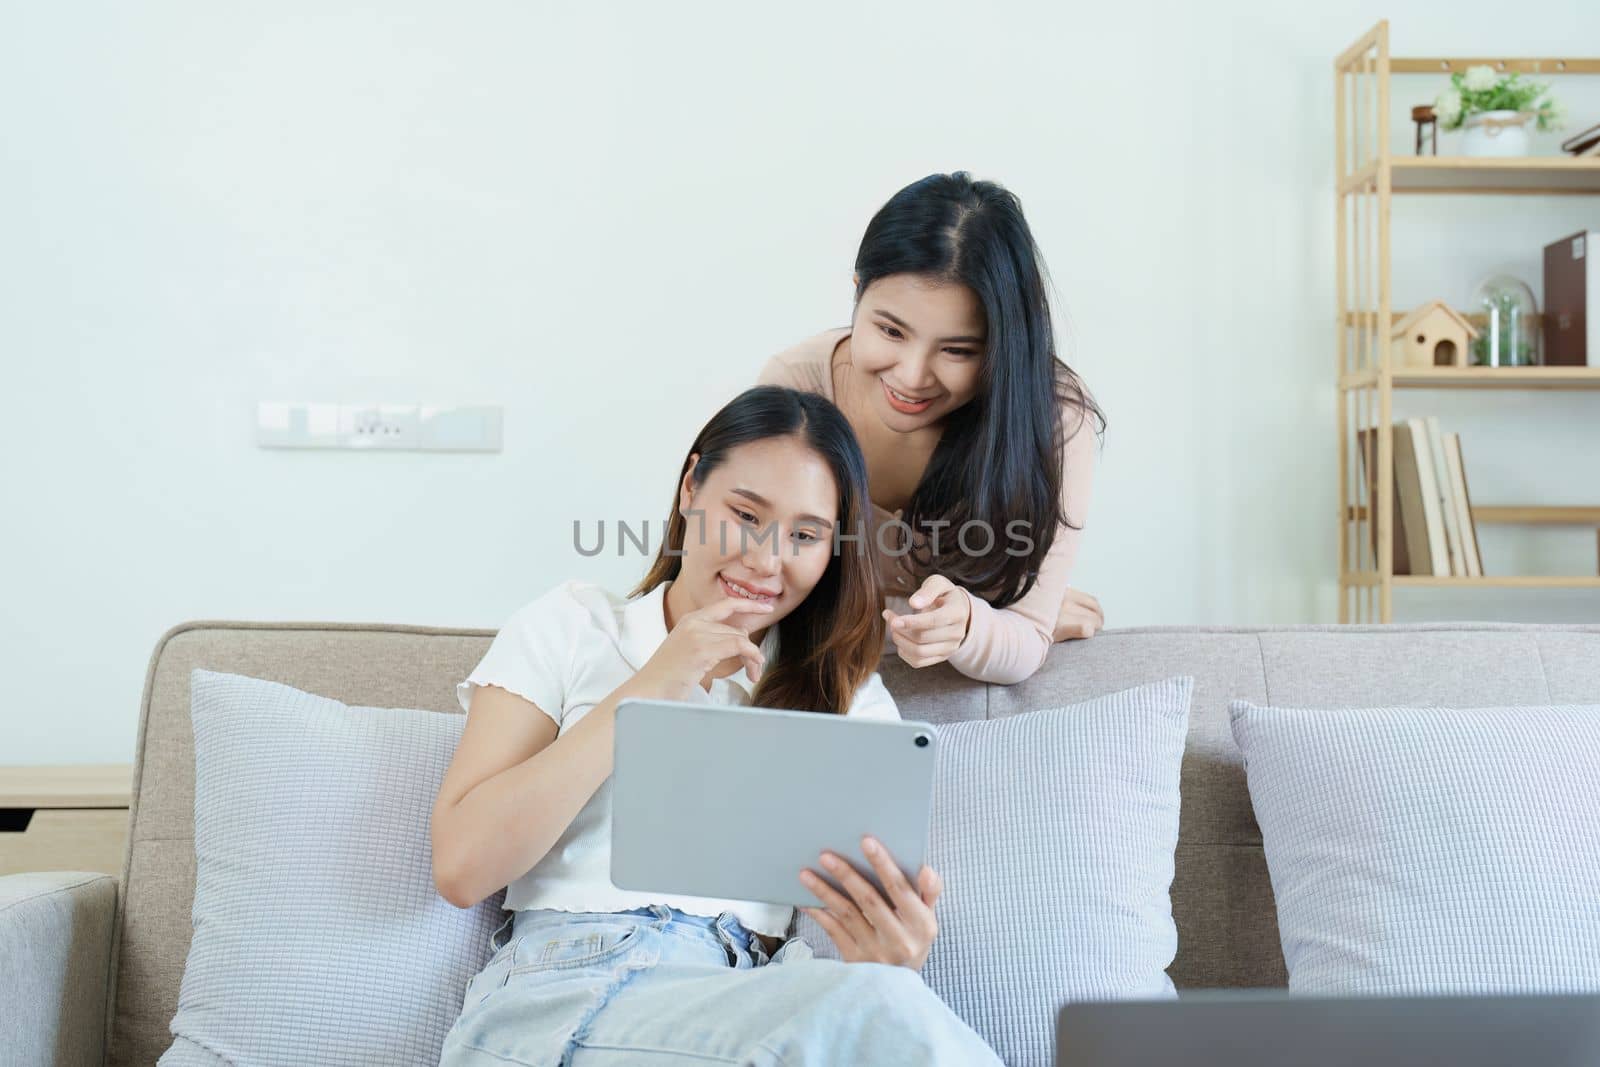 lgbtq, lgbt concept, homosexuality, portrait of two asian women posing happy together and loving each other while playing tablet at sofa.